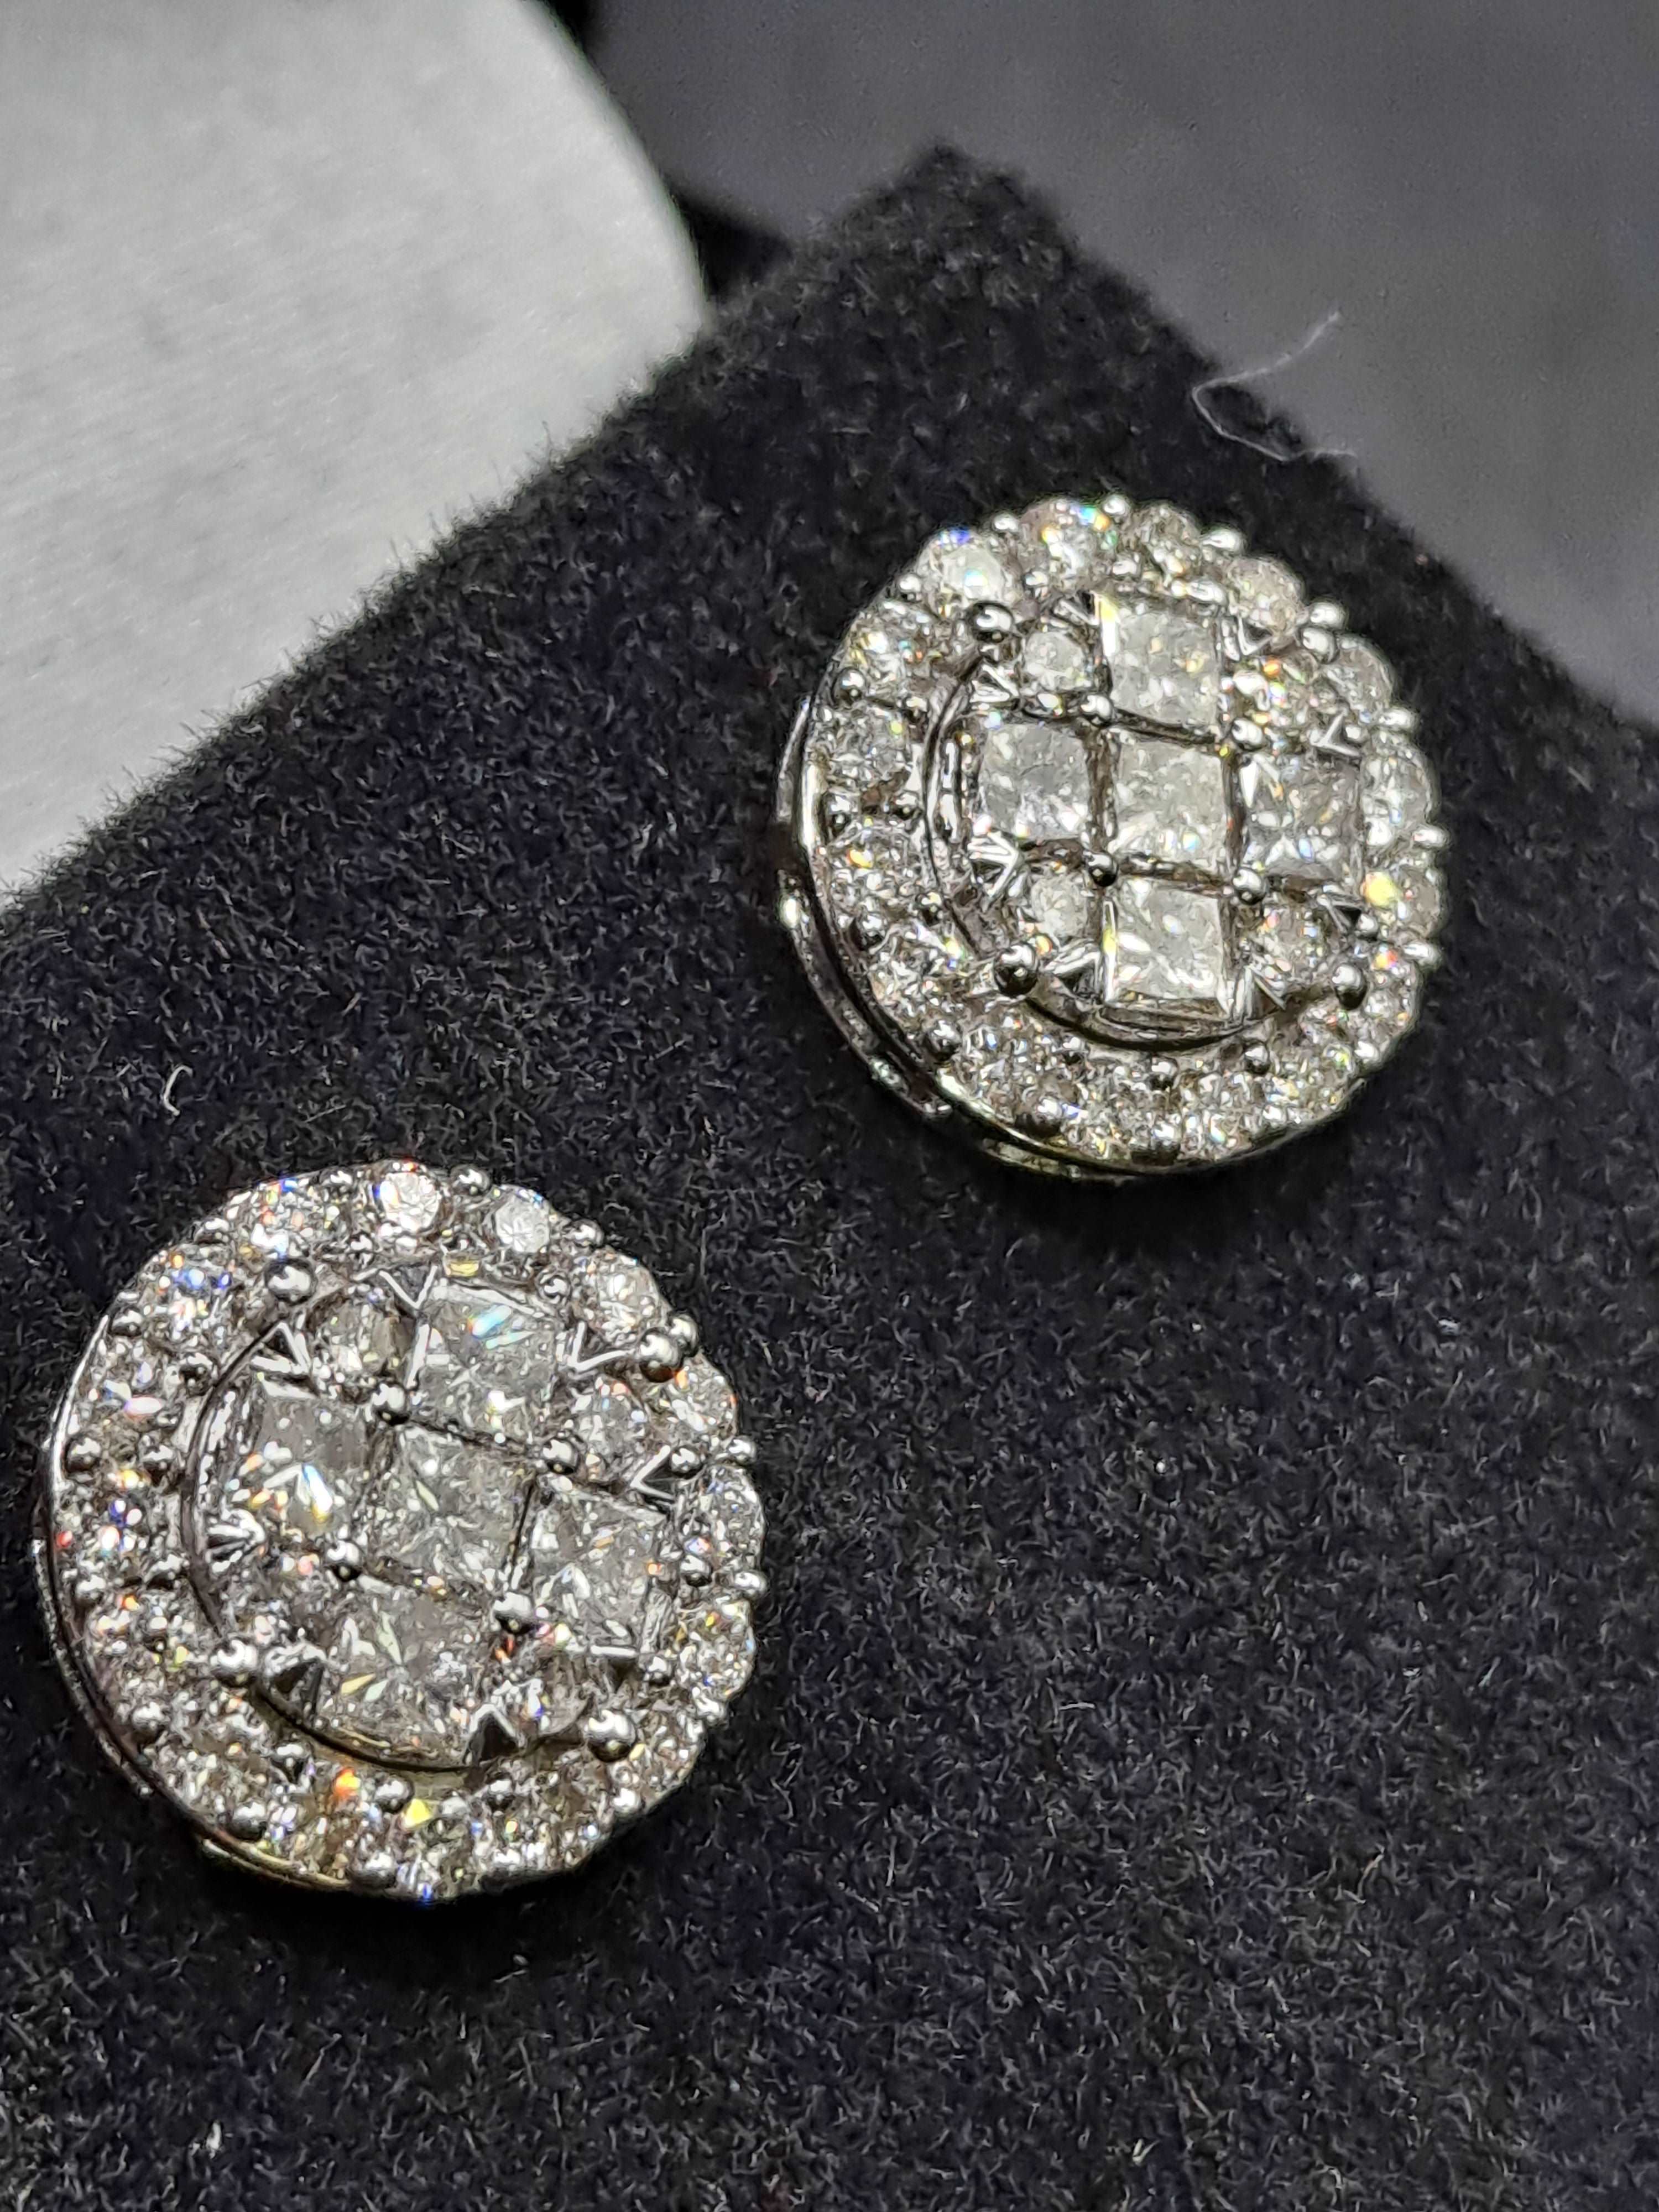 12mm 14k white gold "large" 2 .25 cts natural diamond clusters vs-1 earrings